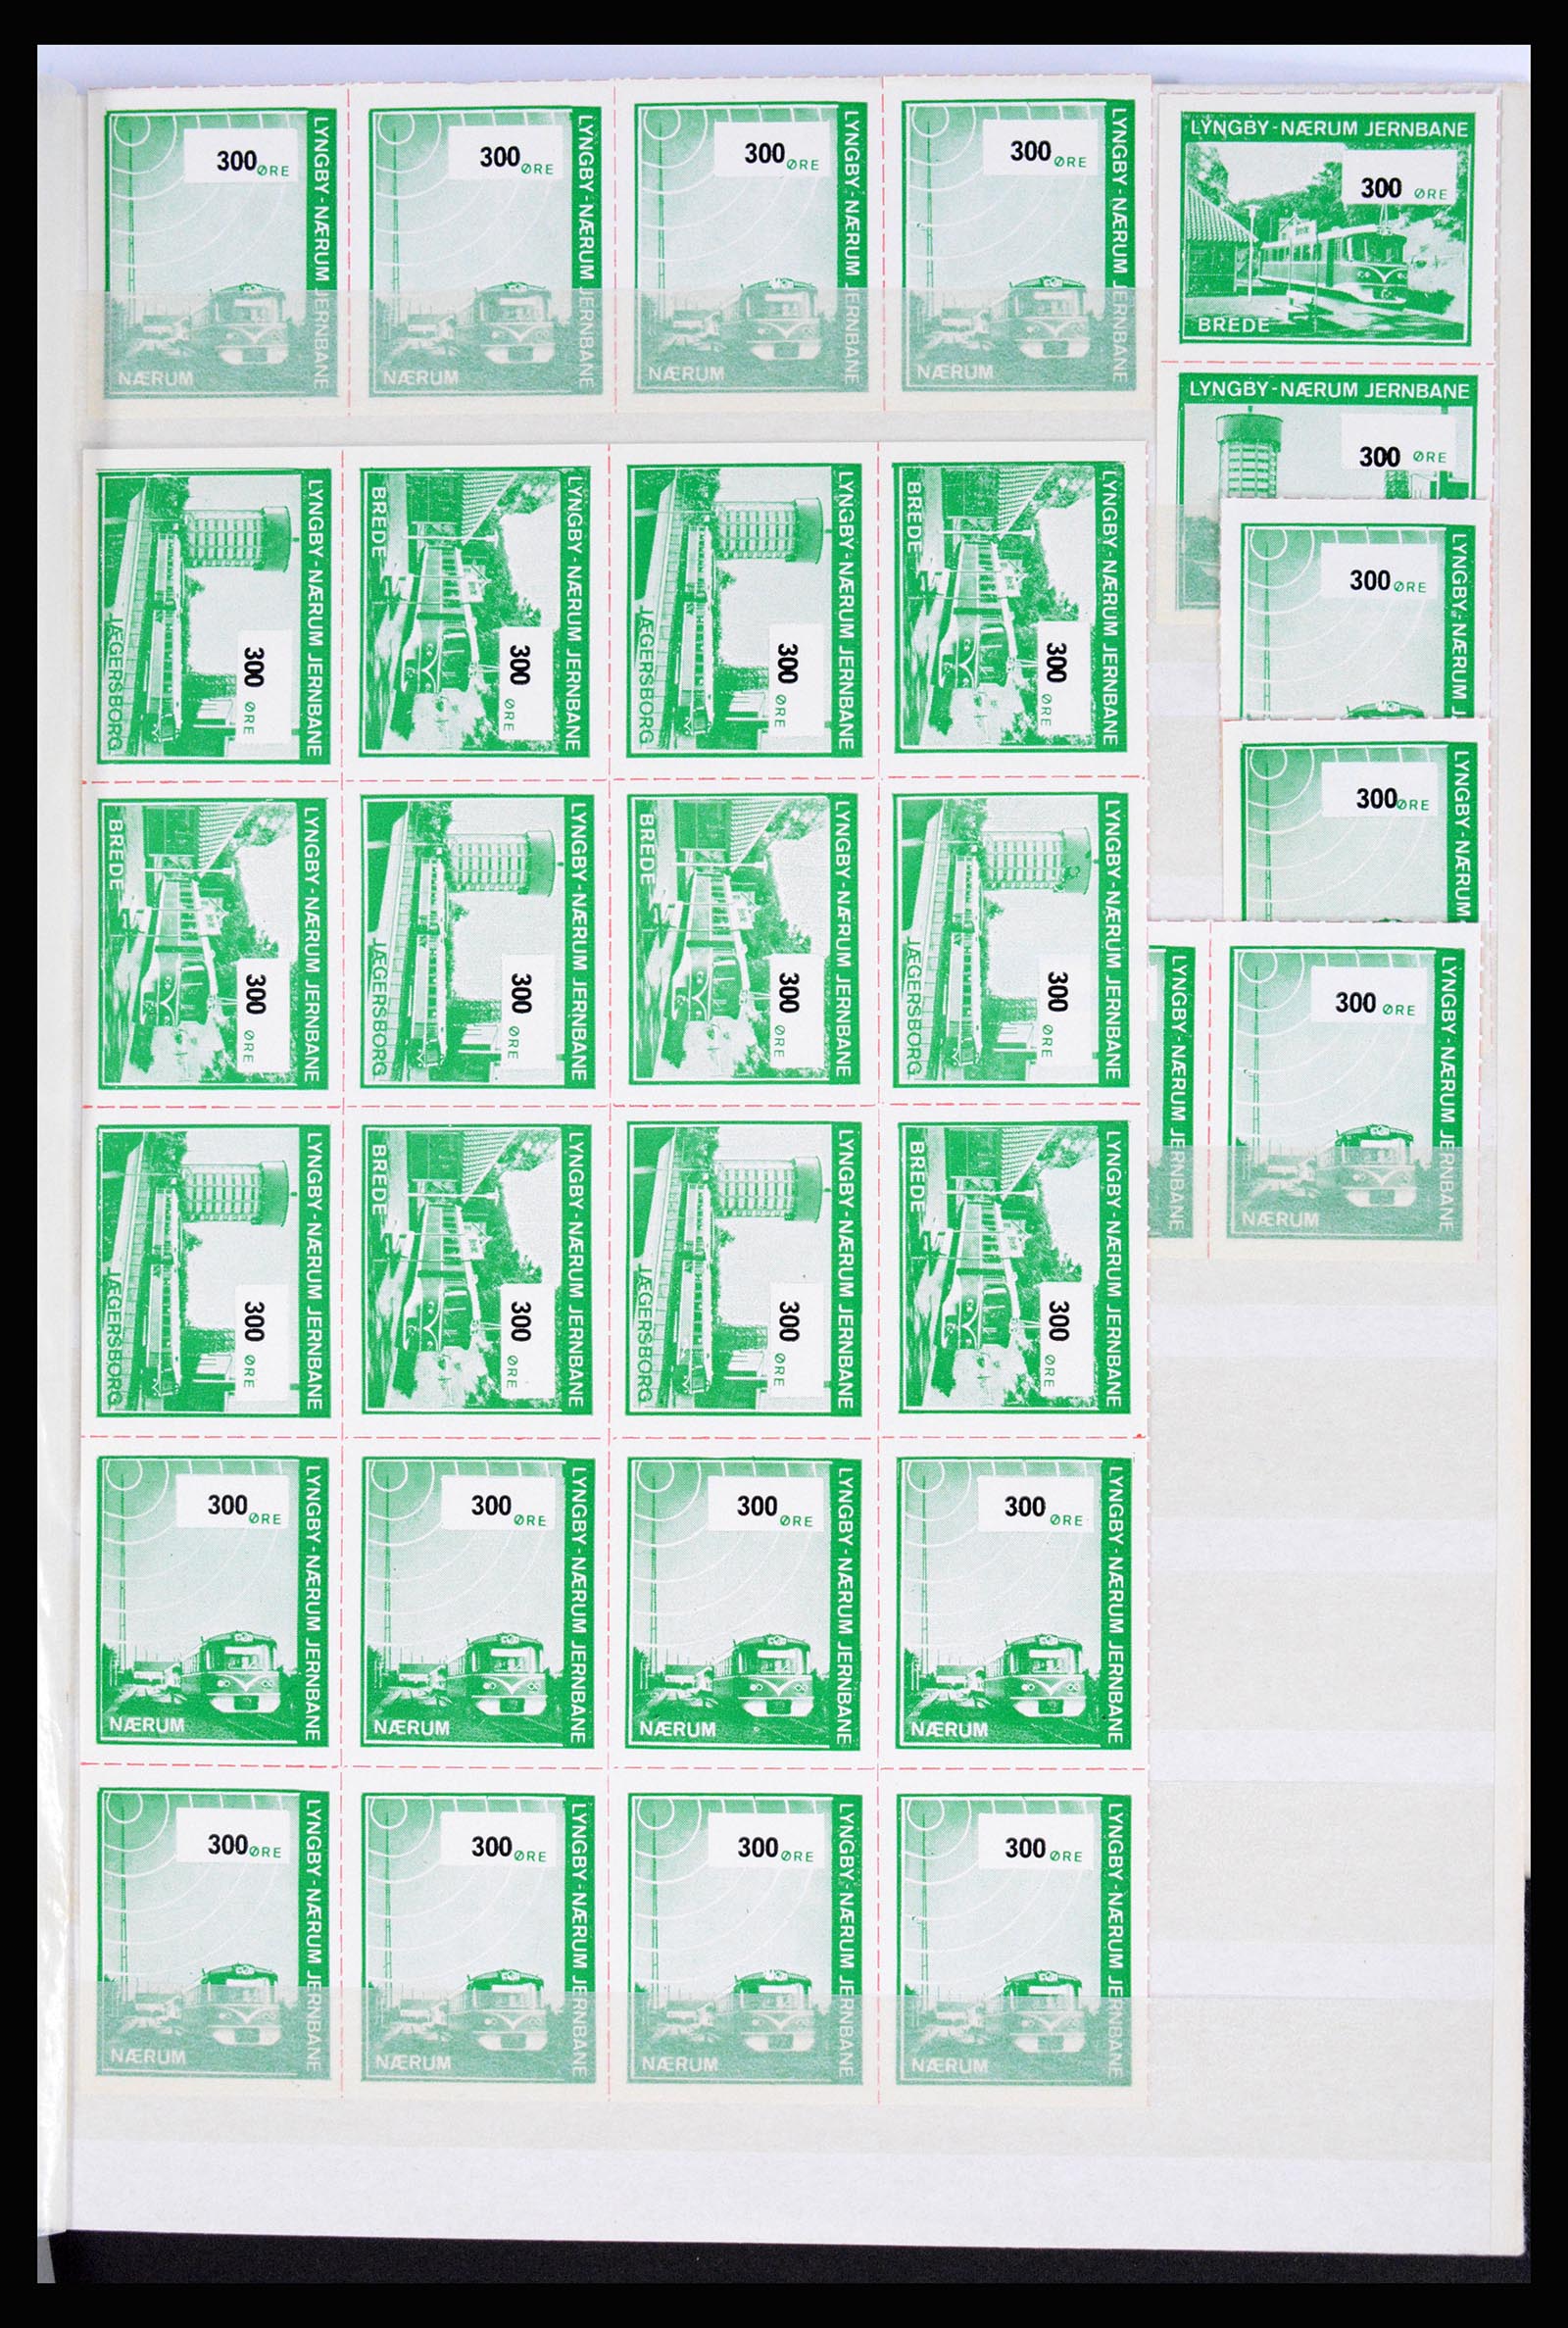 36982 059 - Stamp collection 36982 Denmark railroad stamps.